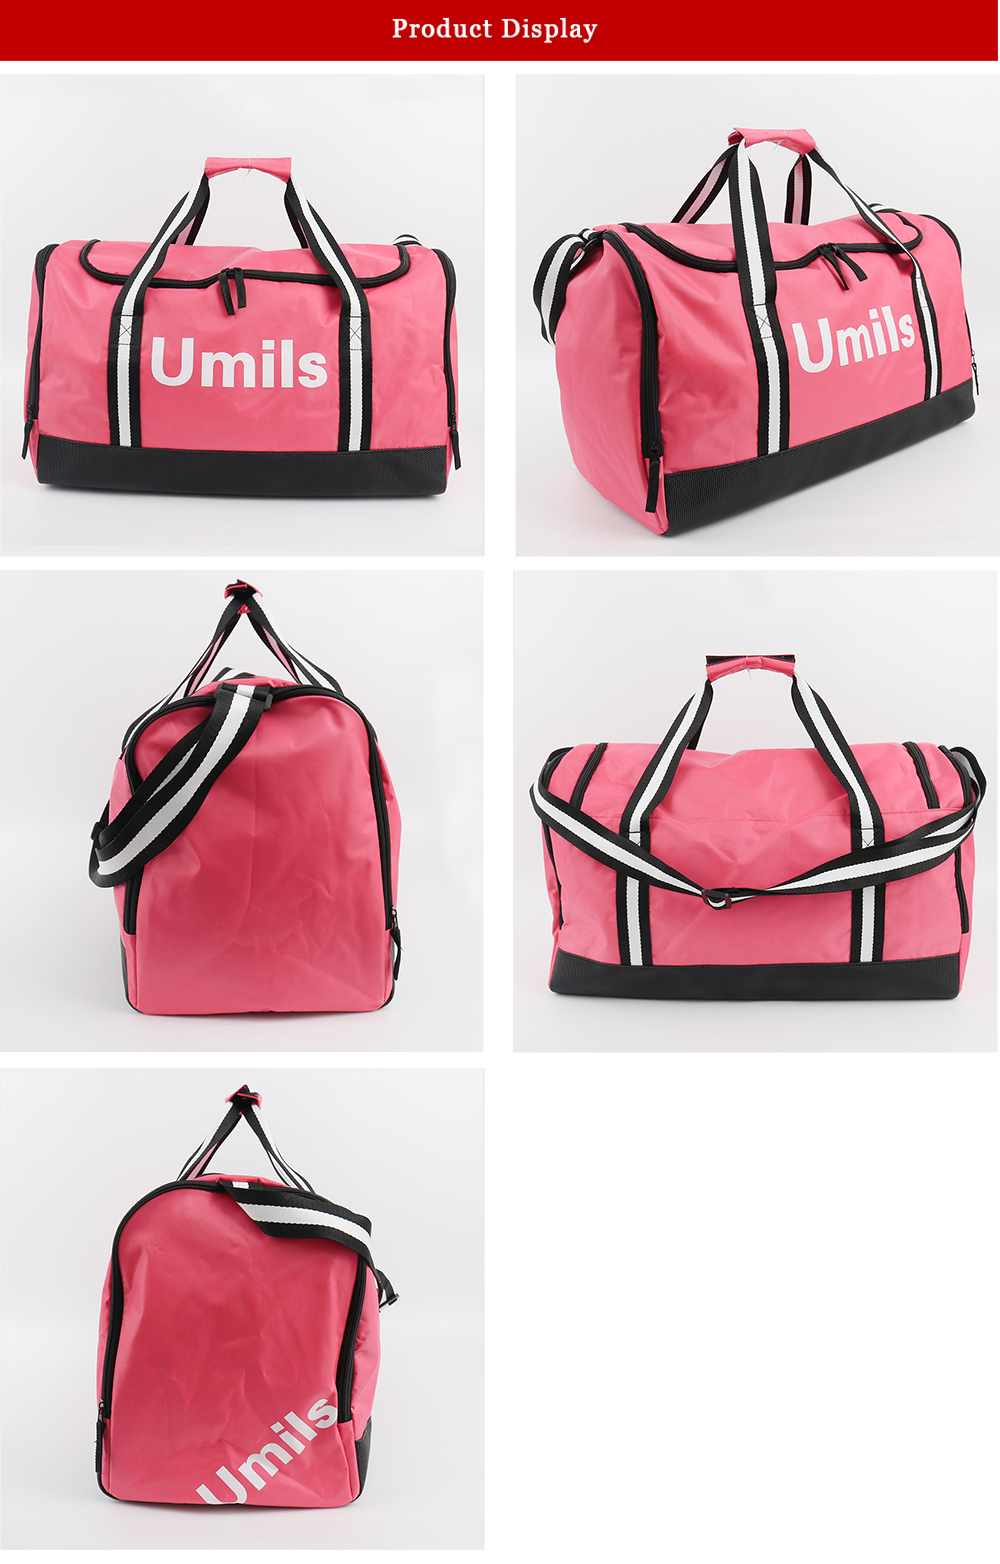 Custom Pink Fitness Bag | Pink Fitness Bag | Fitness Accessories in China